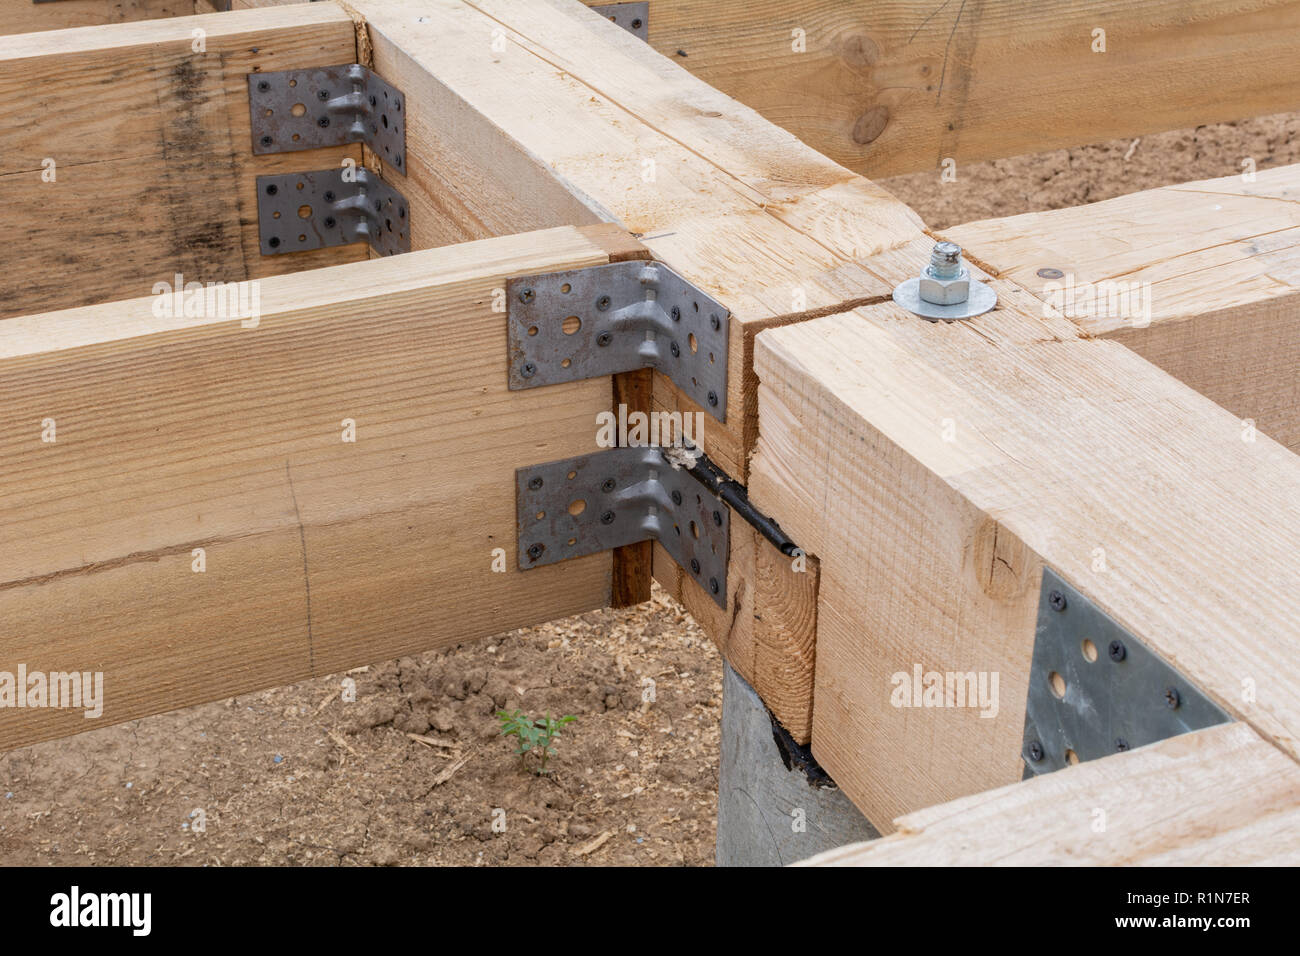 Wooden flooring base under construction. Closeup on pile foundations support the floor. Stock Photo